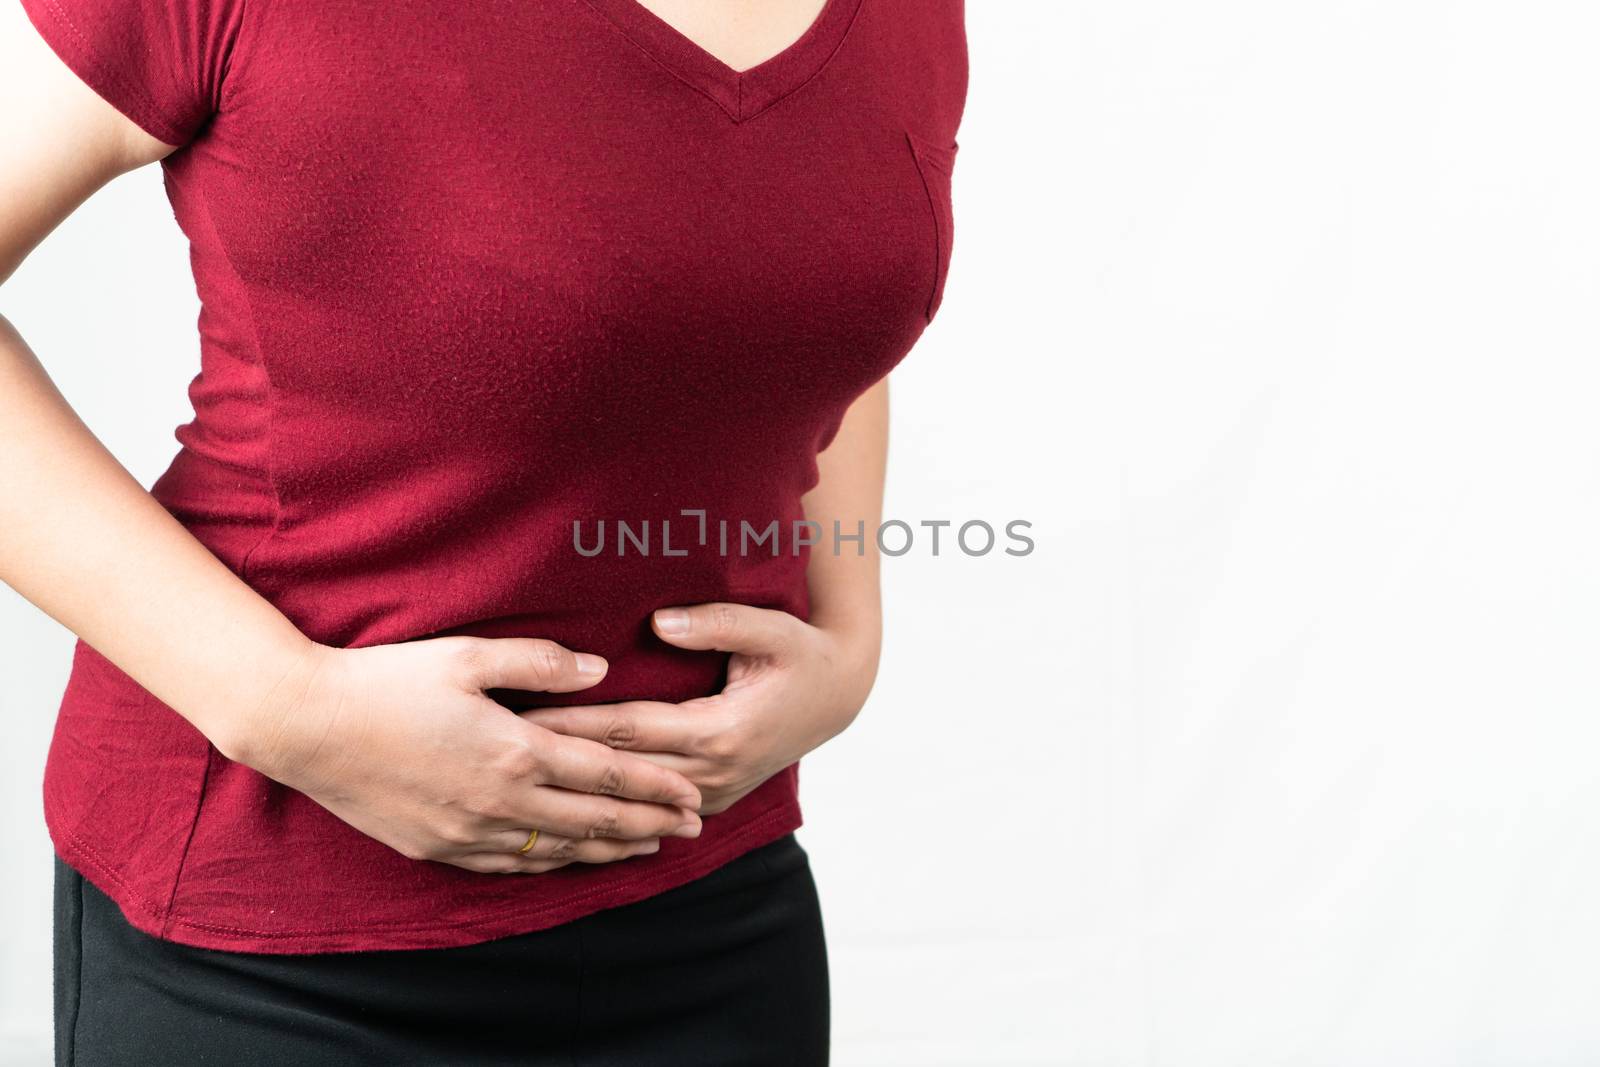 stomachache, young woman suffering from abdominal pain feeling s by psodaz